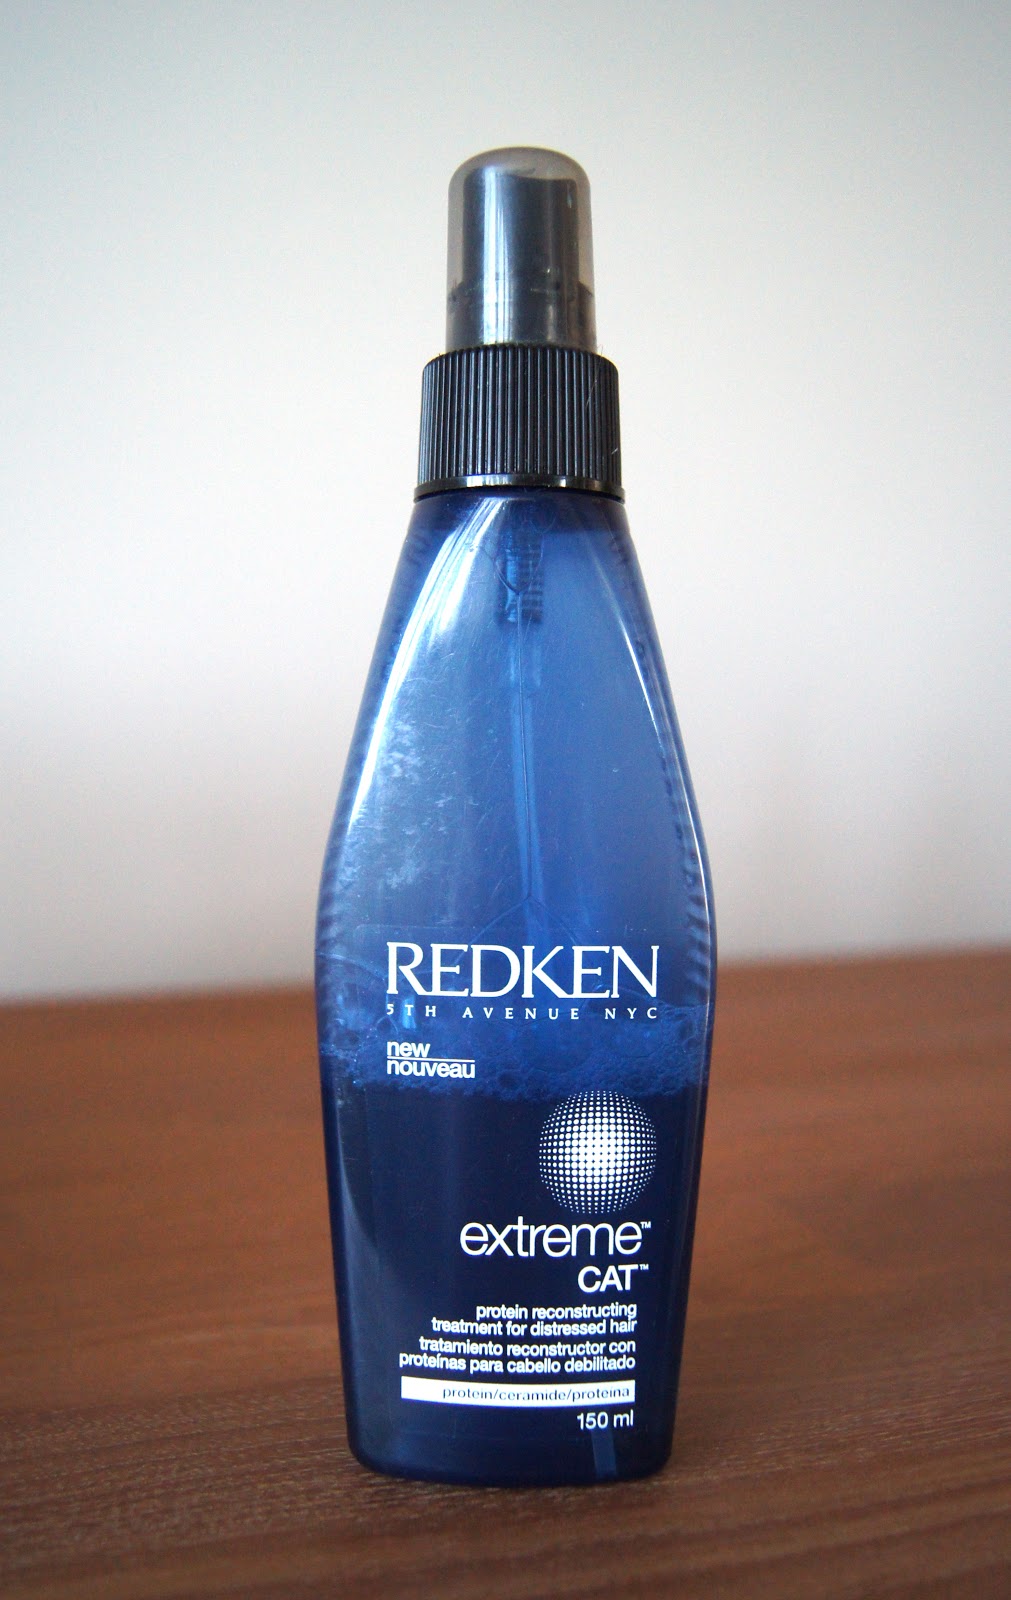 redken extreme cat protein reconstructing hair treatment review